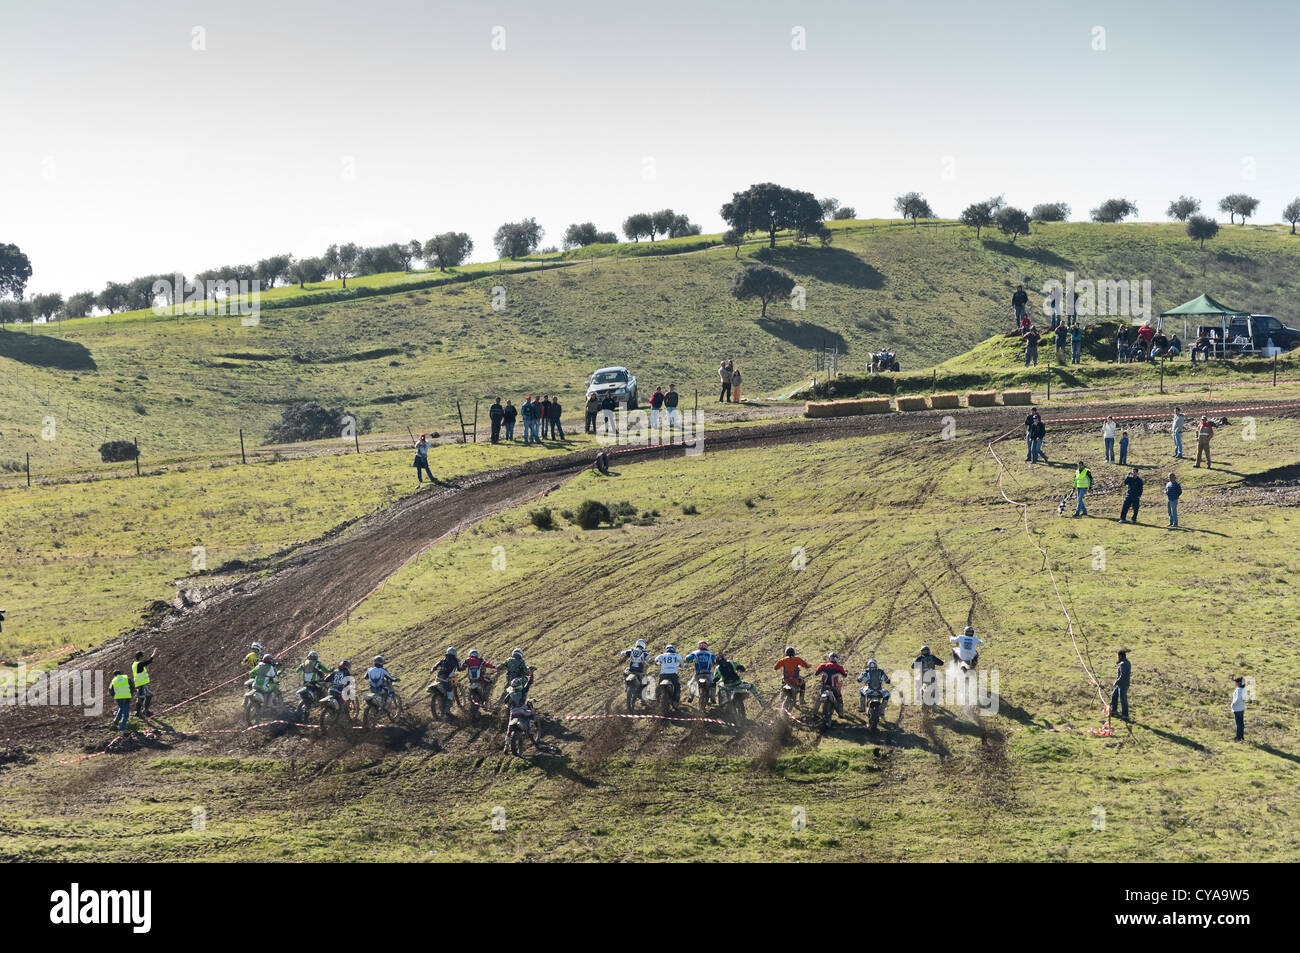 Overview of the riders lined up at the starting line of the motocross track of Safara, Alentejo, portugal Stock Photo